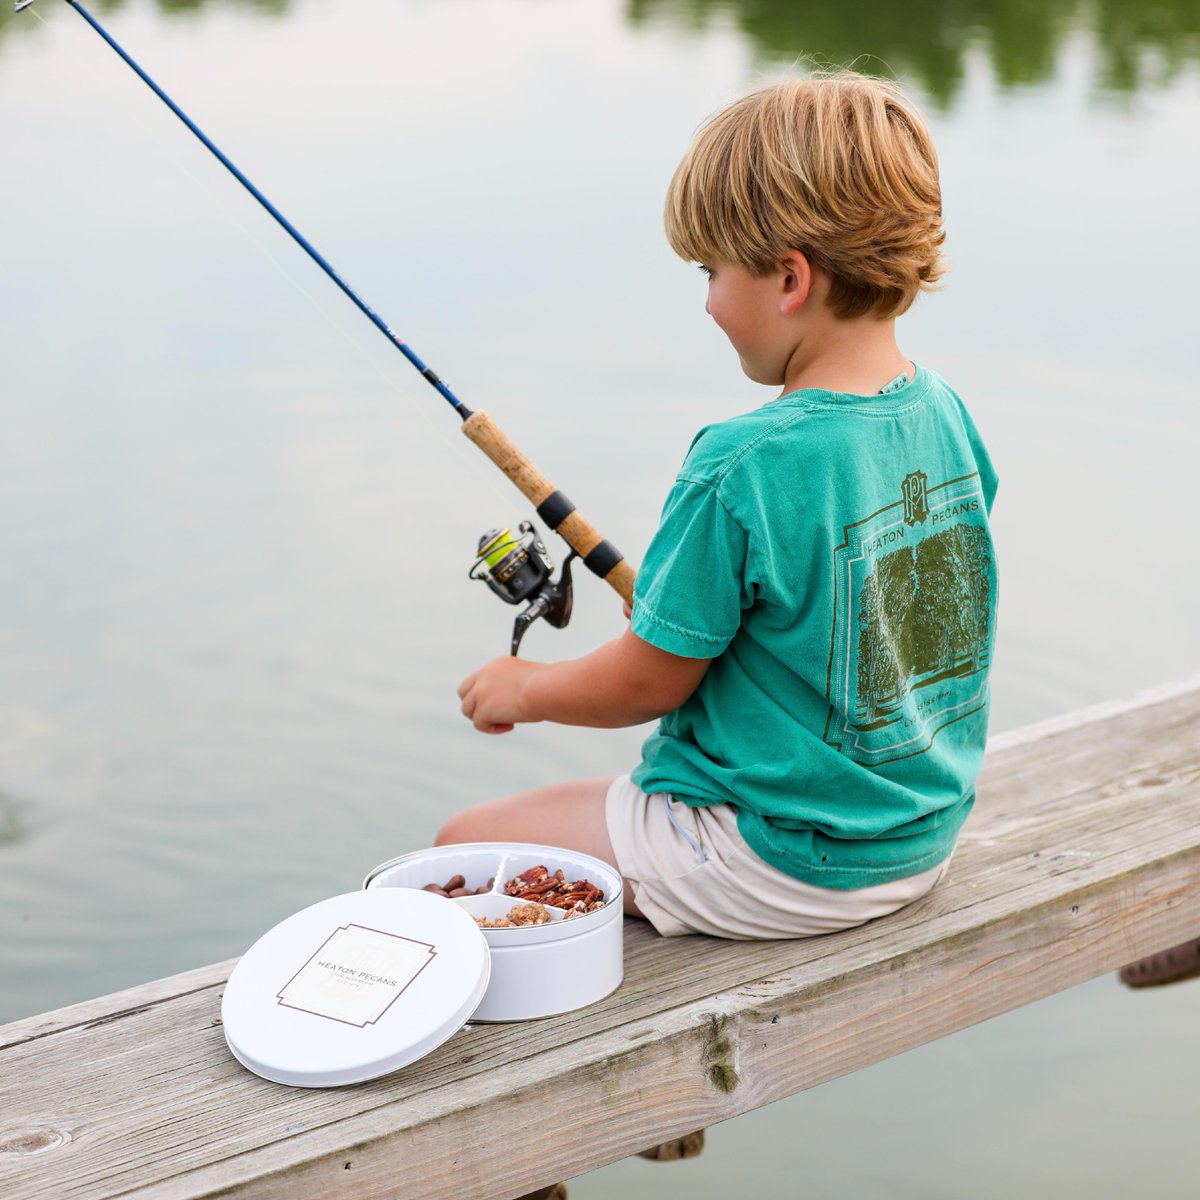 Snacks and fishing, what more to love?

#HeatonPecans #Pecans #CorporateGifts #Traditions #ChristmasGifting #Gift #GiftIdea #Snack #FarmToTable #MississippiMade #FarmFamily #FamilyBusiness #MississippiDelta #FlavoredPecans #HeartHealthy